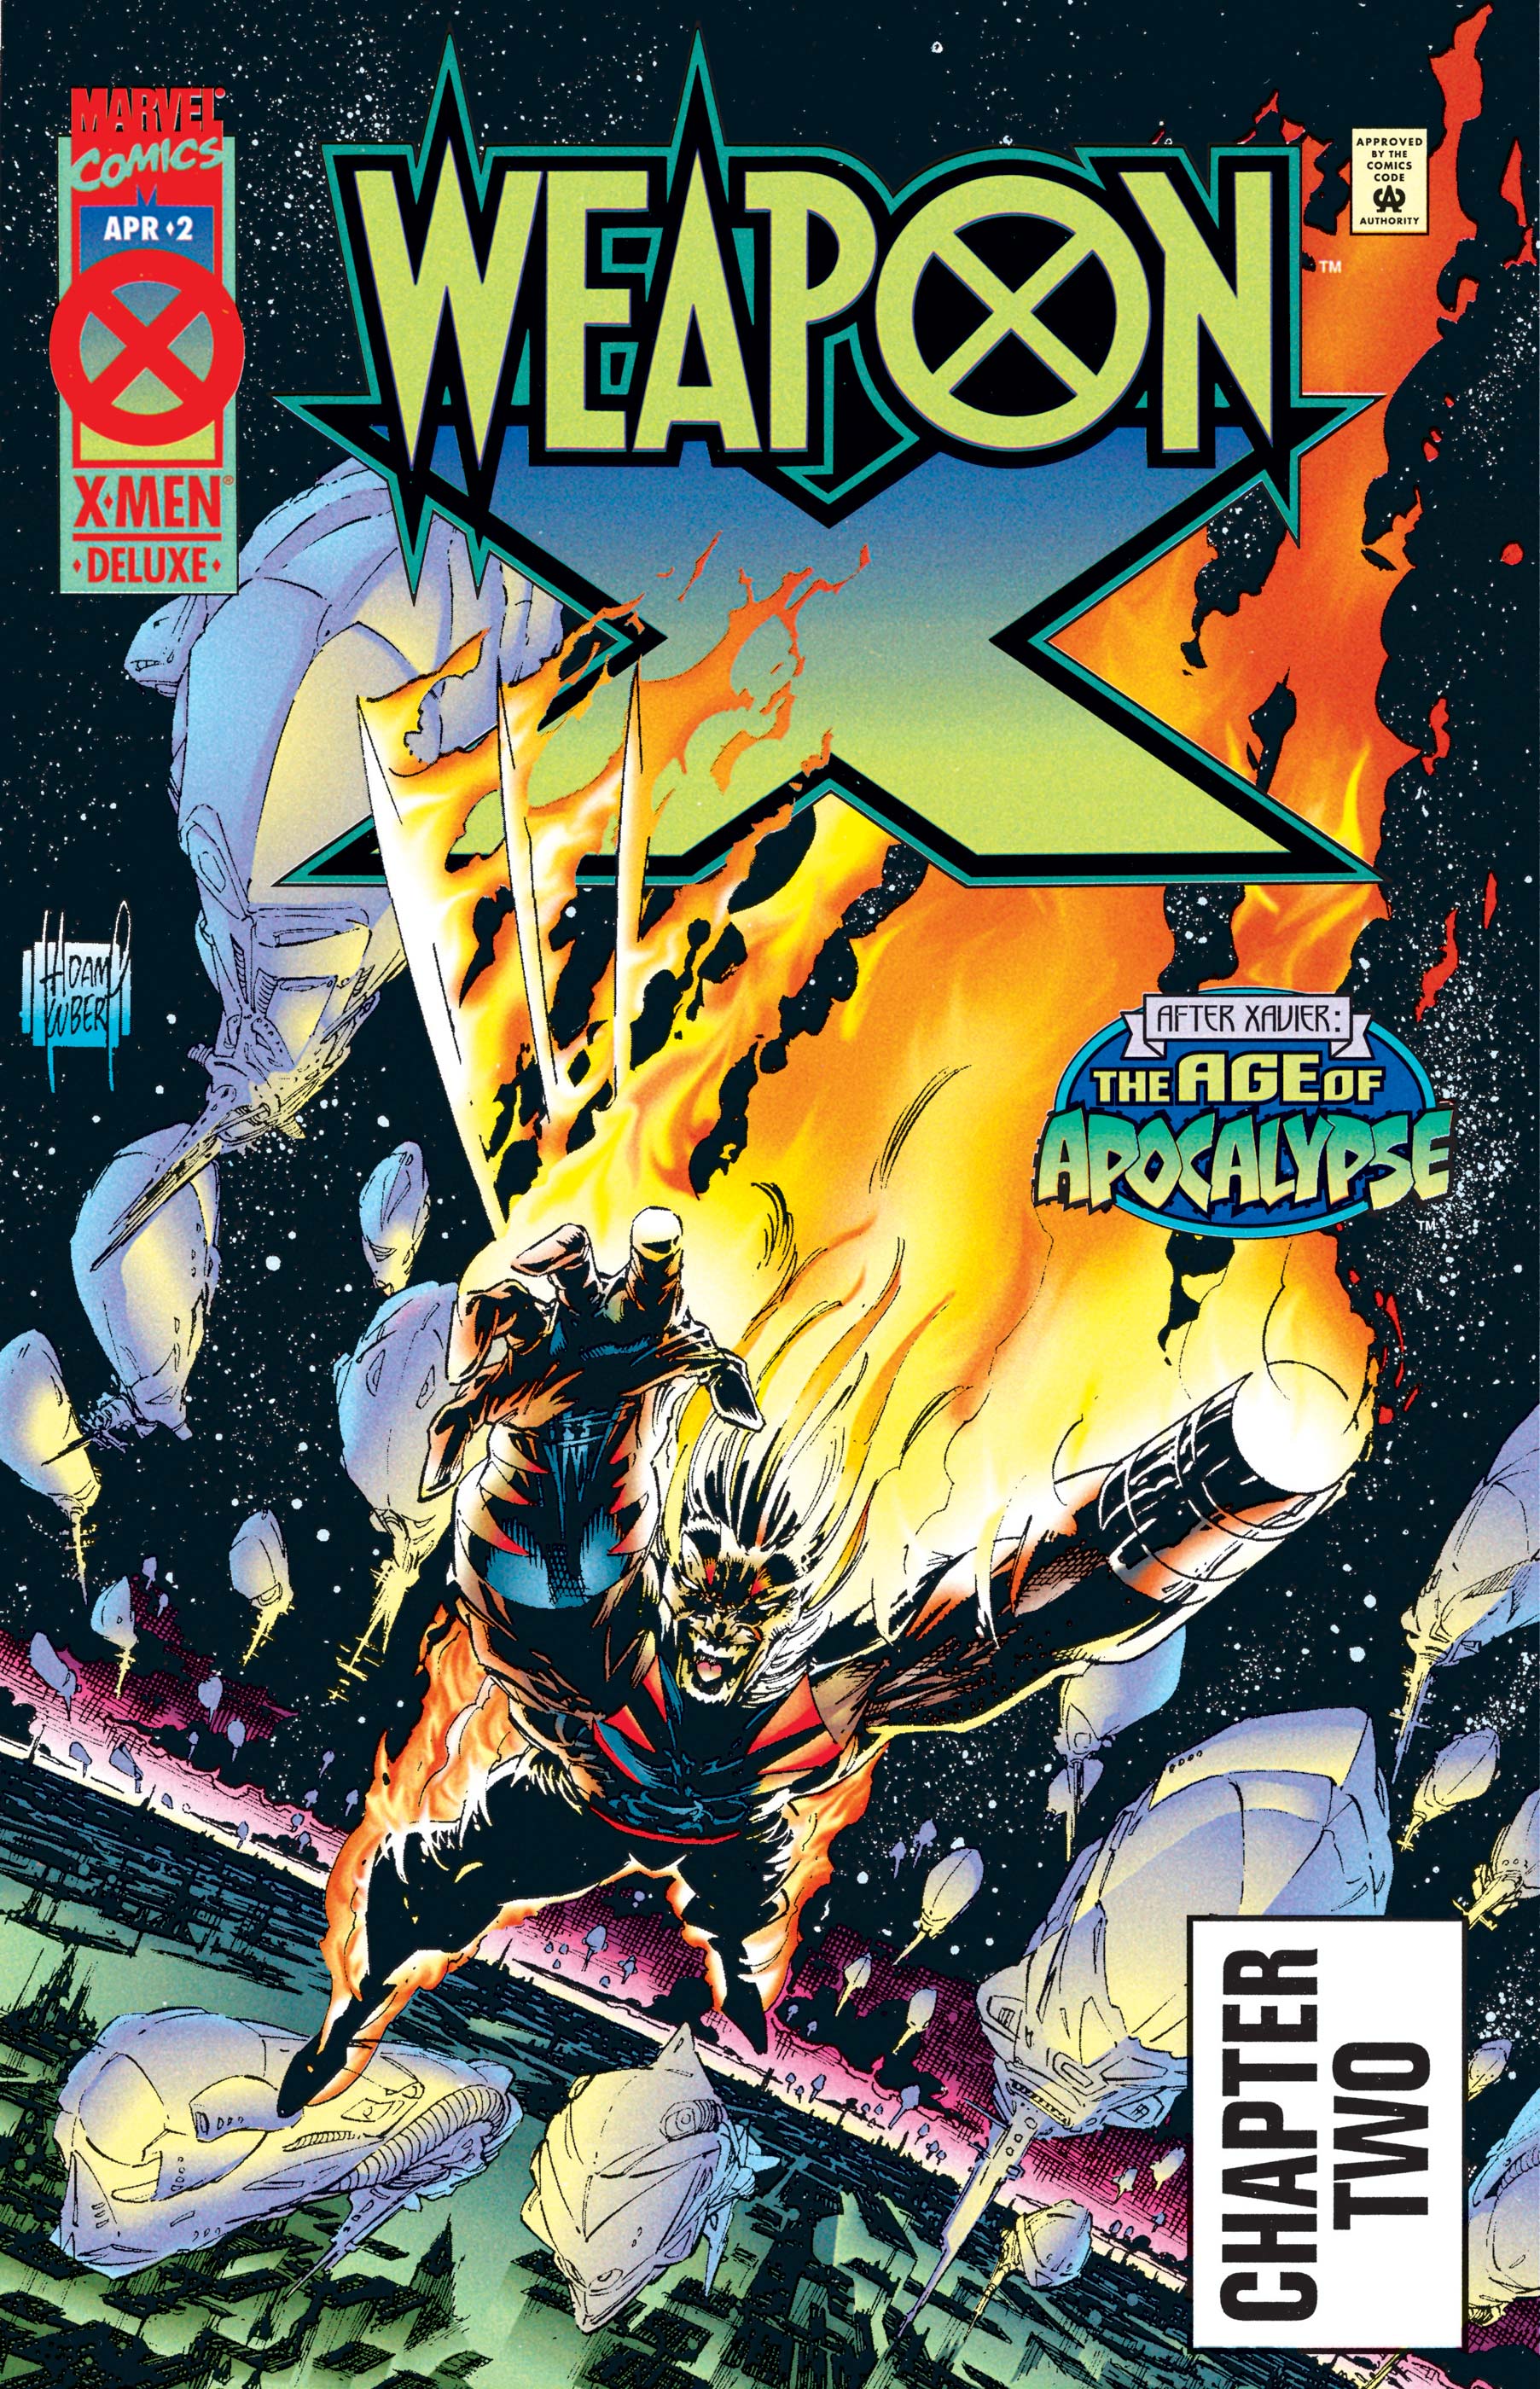 Weapon X (1995) #2